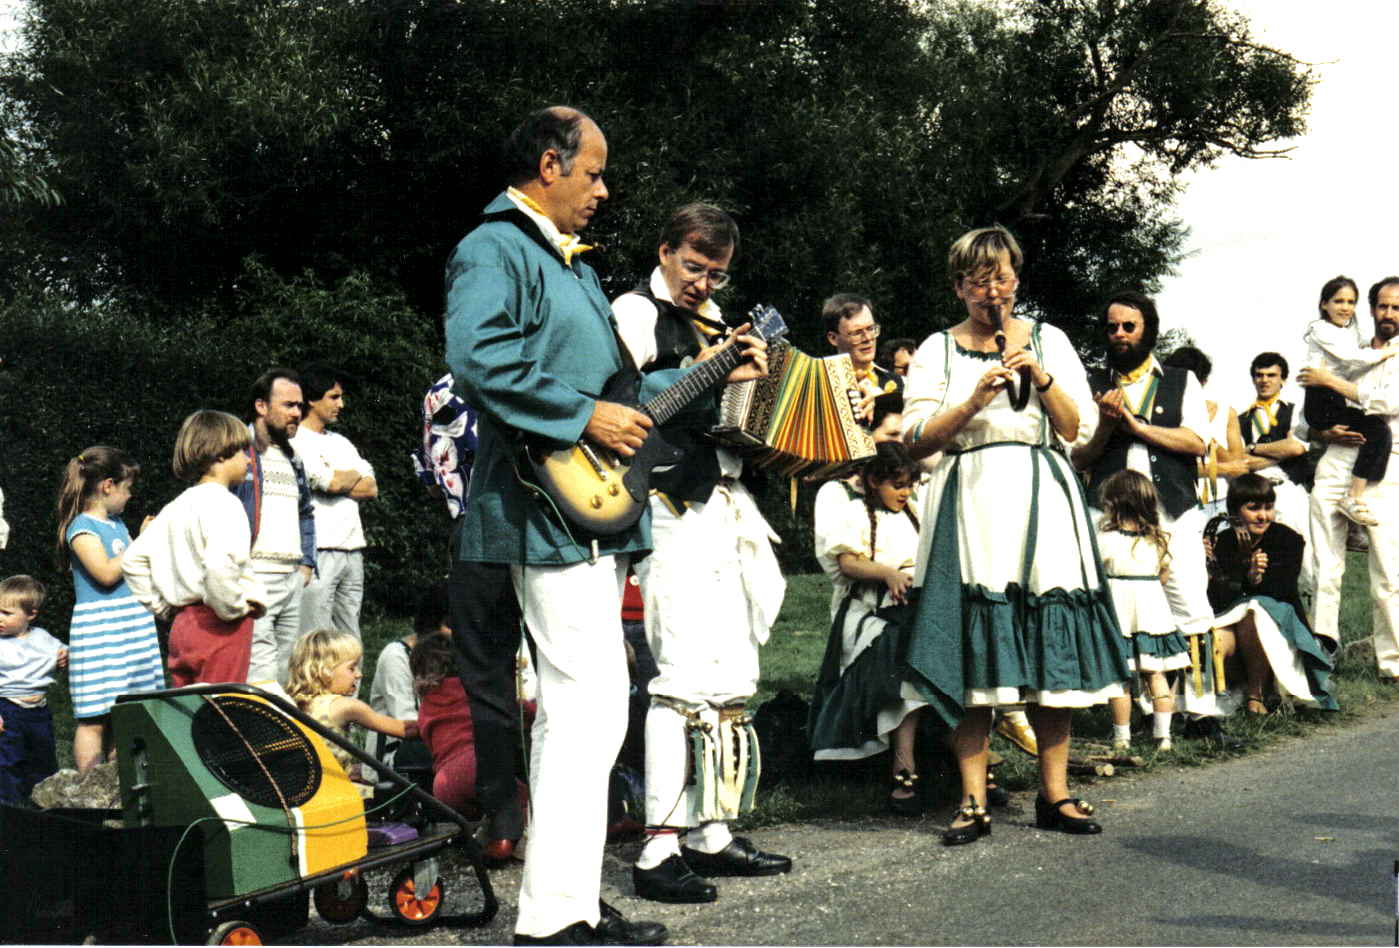 Stephen Giles with North Wood Morris, 1984